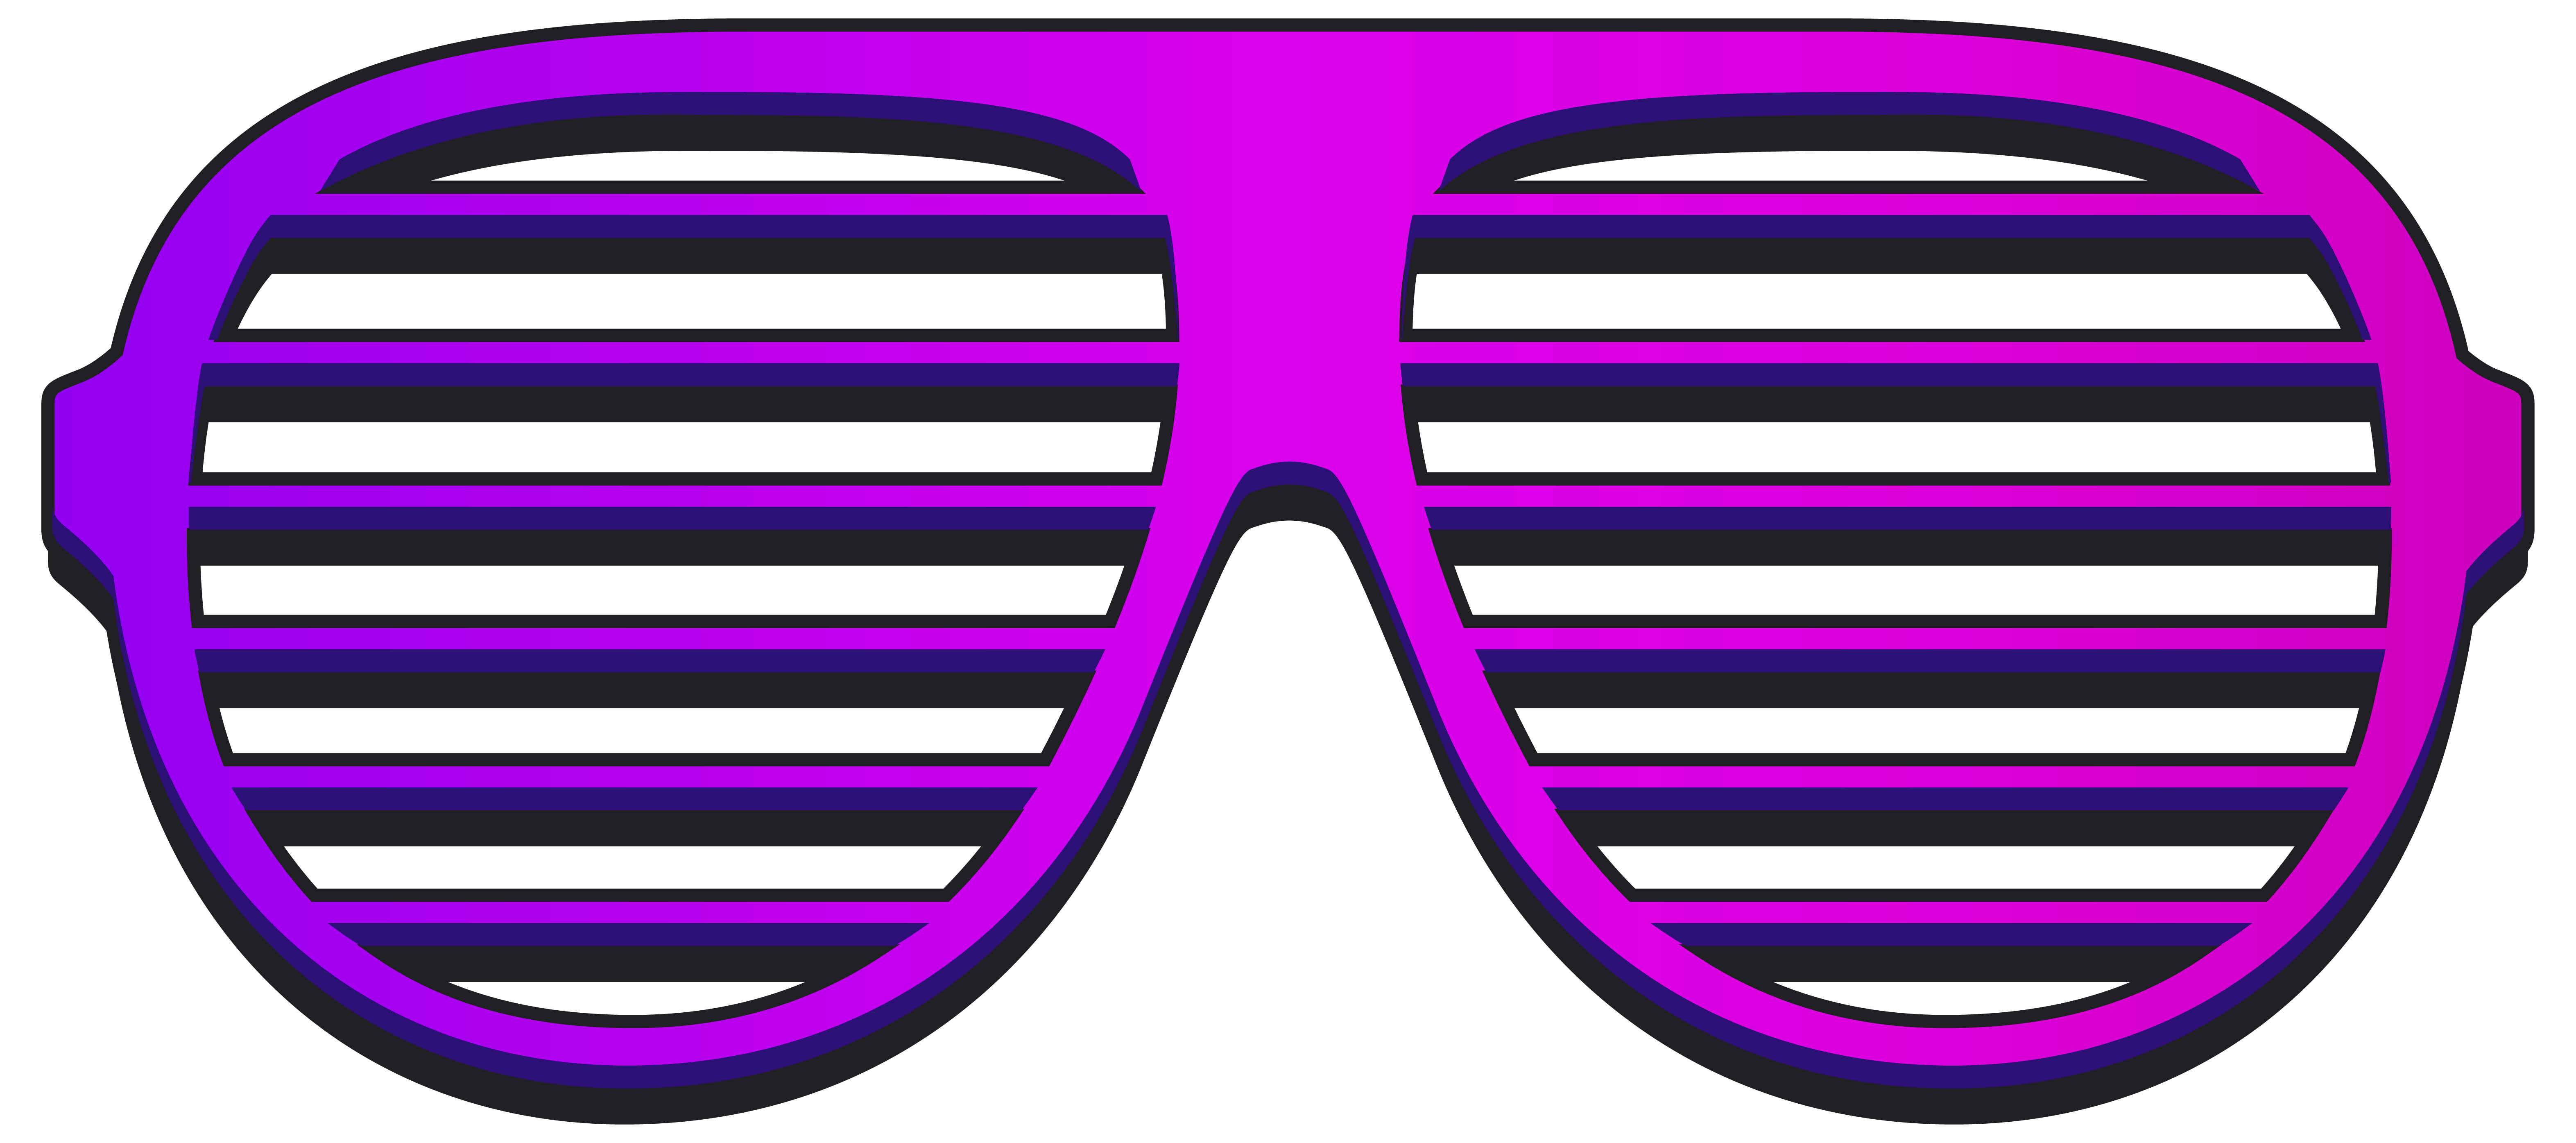 Shutter Sunglasses Shades Cool HD Image Free PNG Clipart